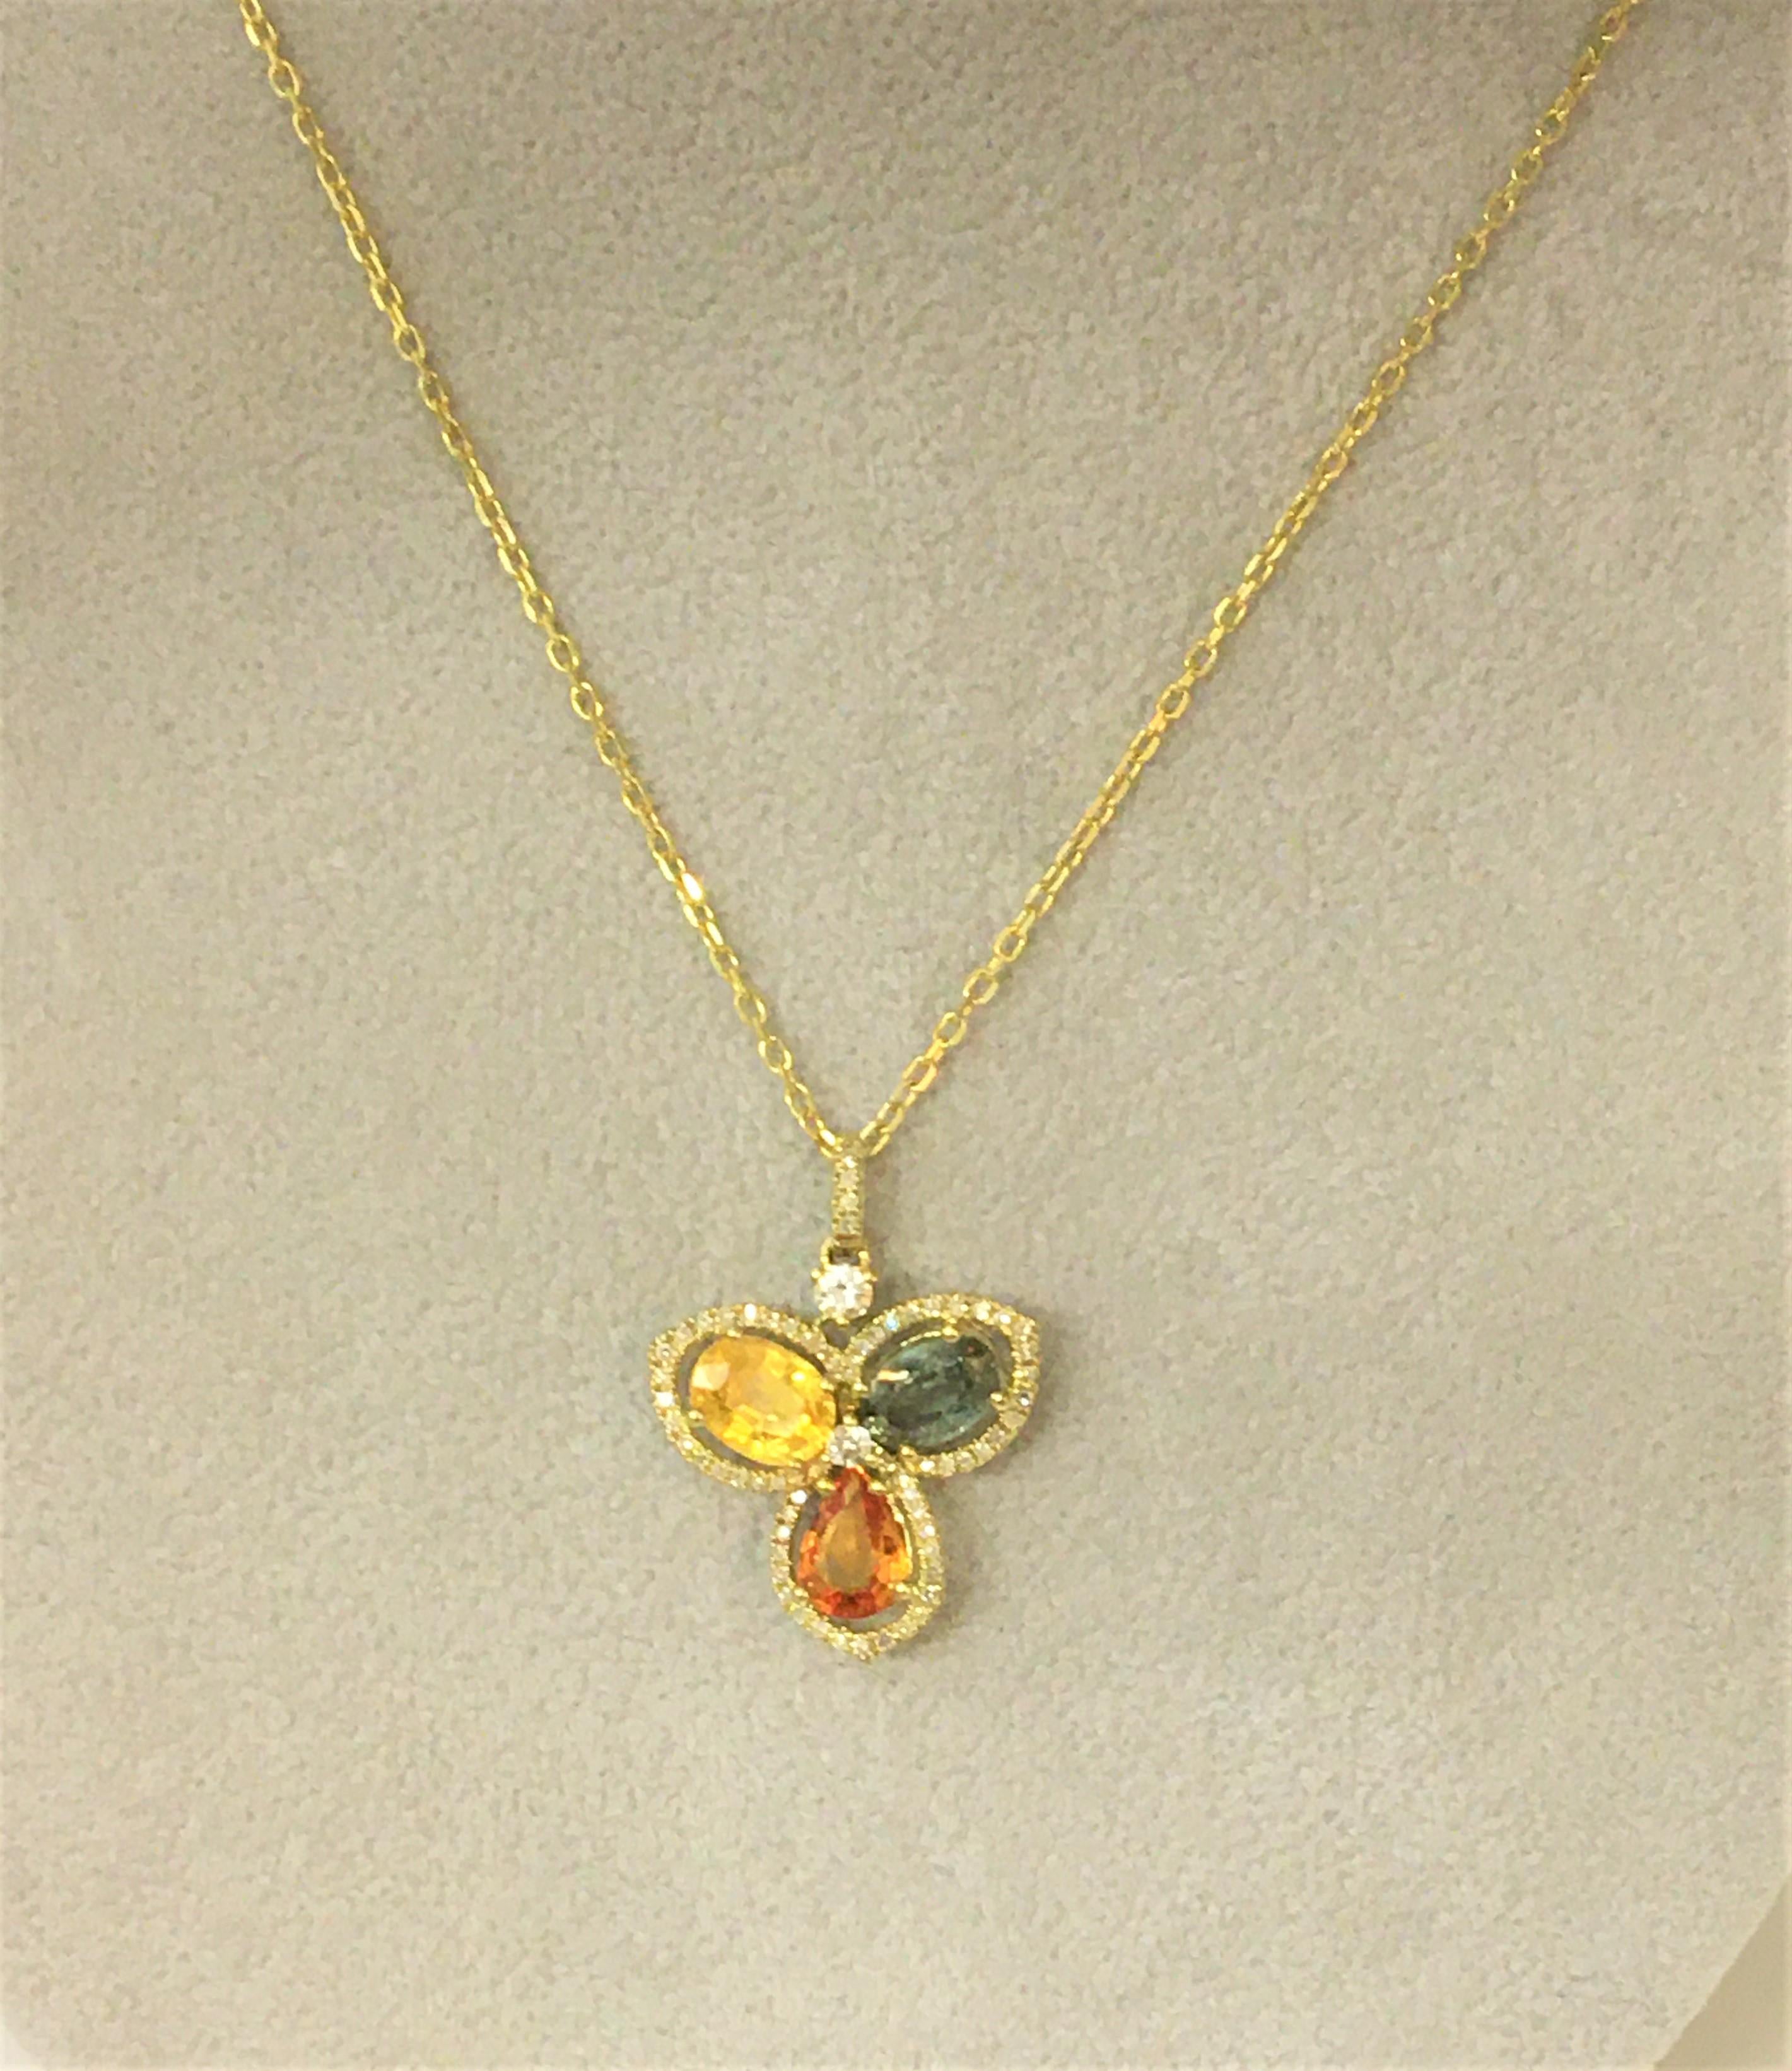 This beautiful piece is perfect for the Fall season and will be great throughout the year with any outfit!
14 karat yellow gold cable chain- 16 inches long.
Three colored sapphires with topaz and diamond details.
Orange, Green and Yellow sapphires -